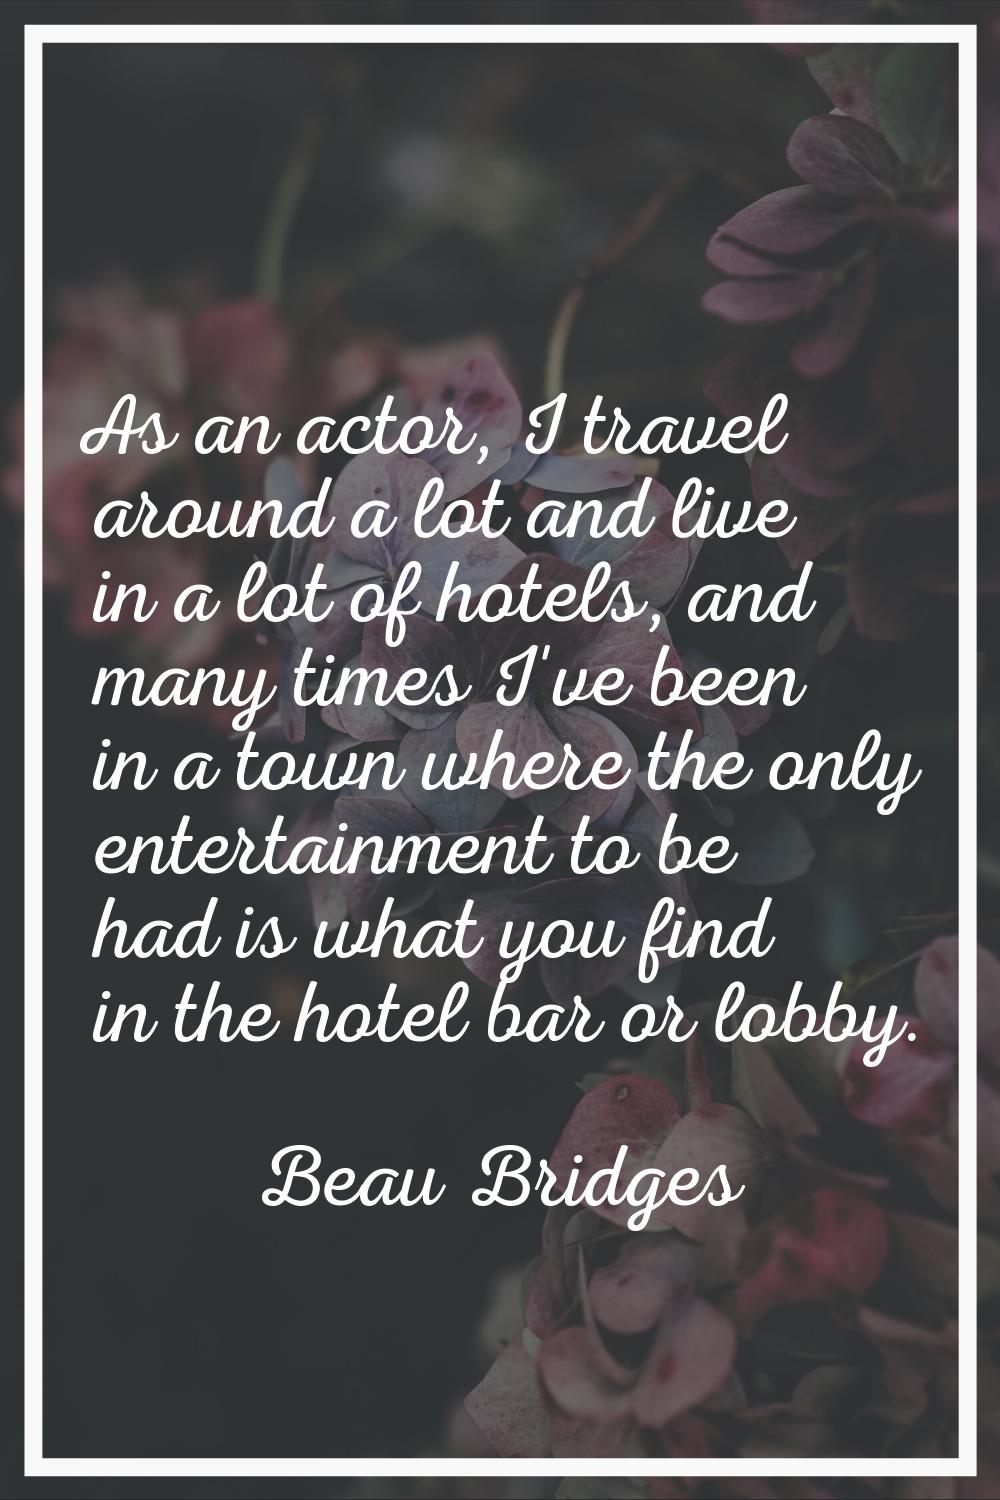 As an actor, I travel around a lot and live in a lot of hotels, and many times I've been in a town 